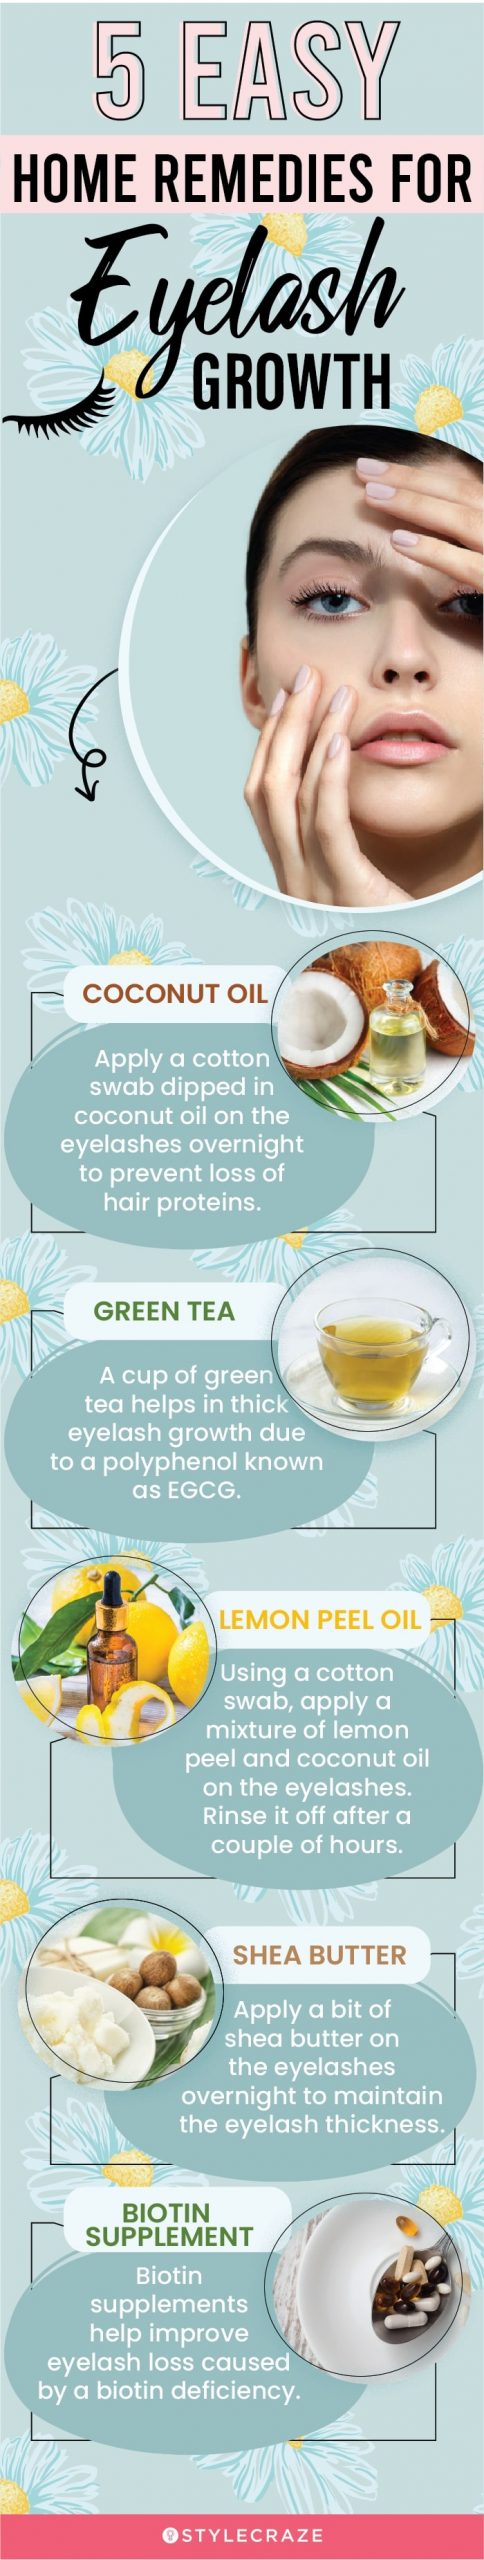 5 easy home remedies for eyelash growth (infographic)